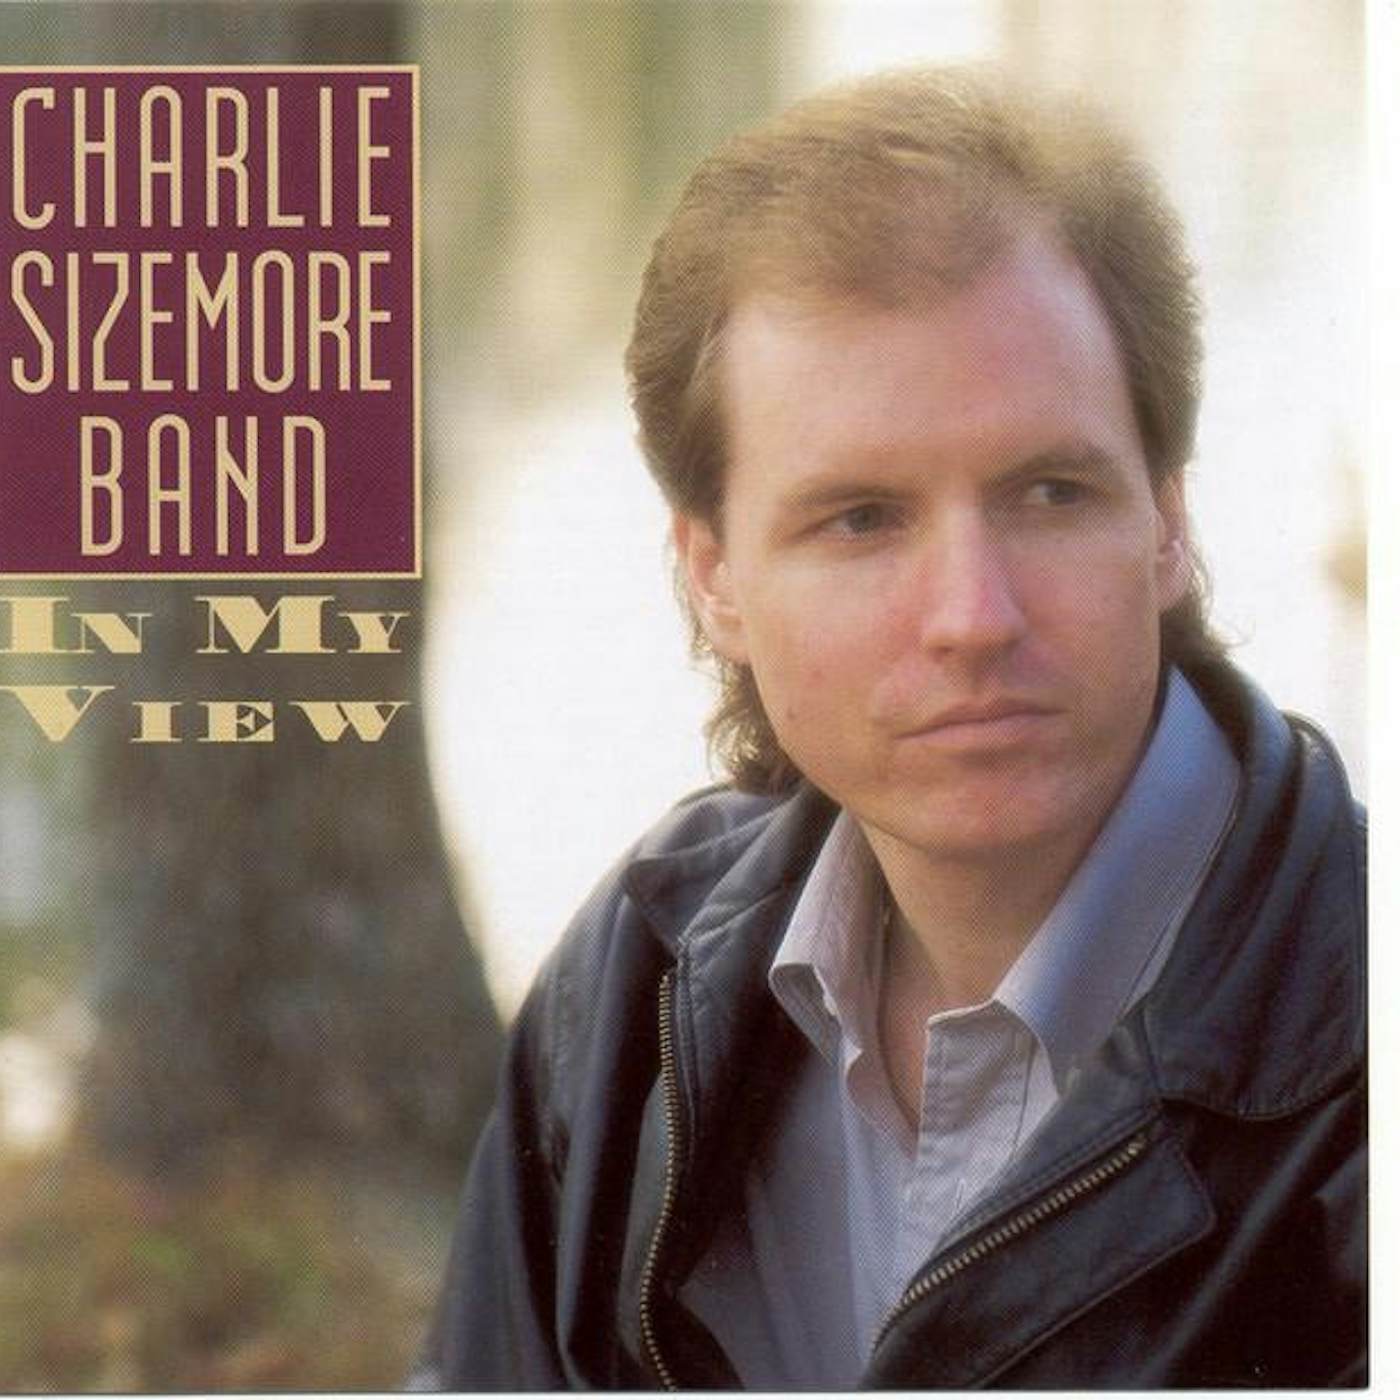 Charlie Sizemore